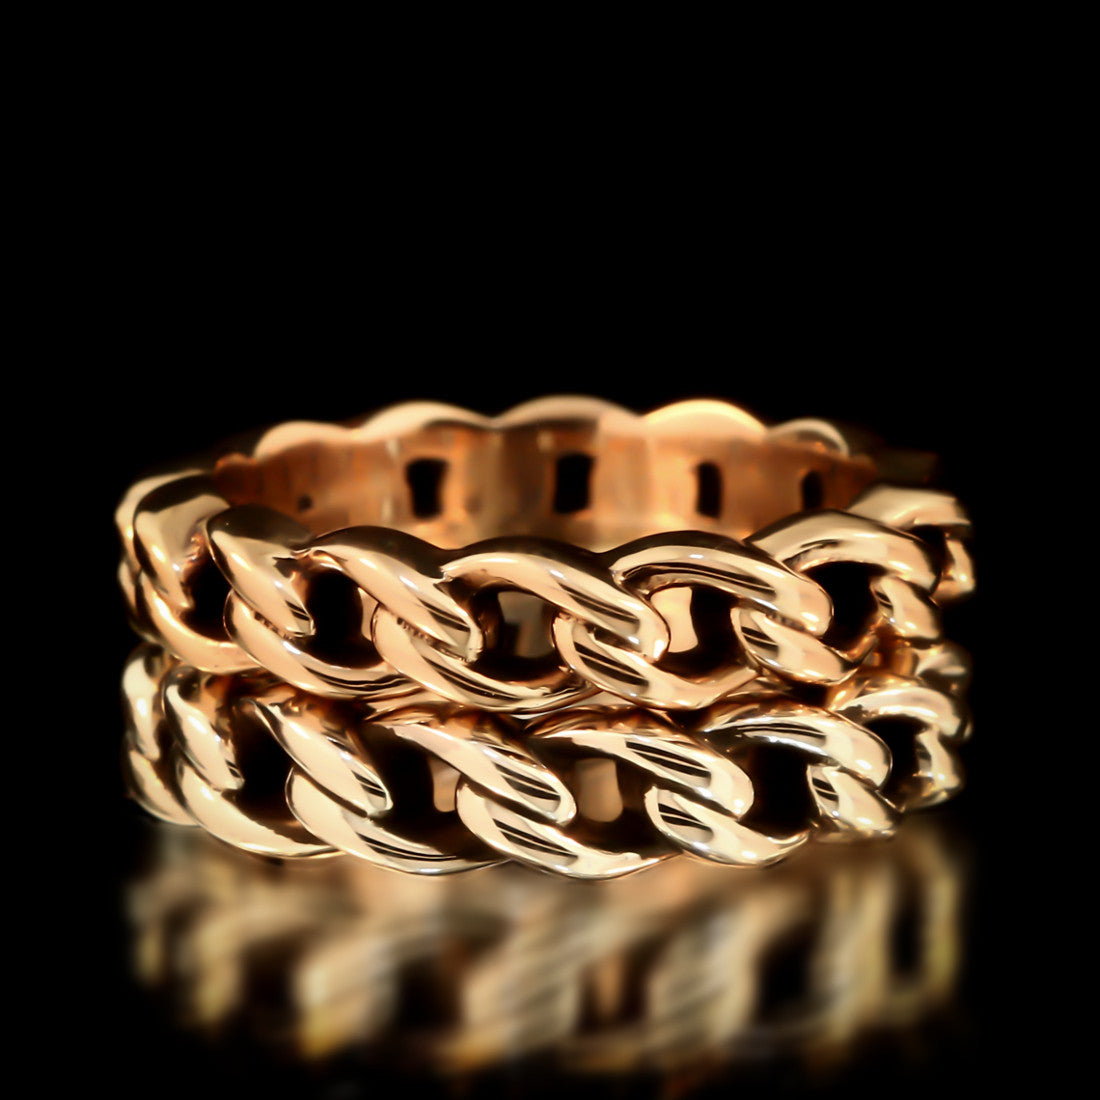 Silver & Brass Chain Link Ring Set - Twisted Love NYC